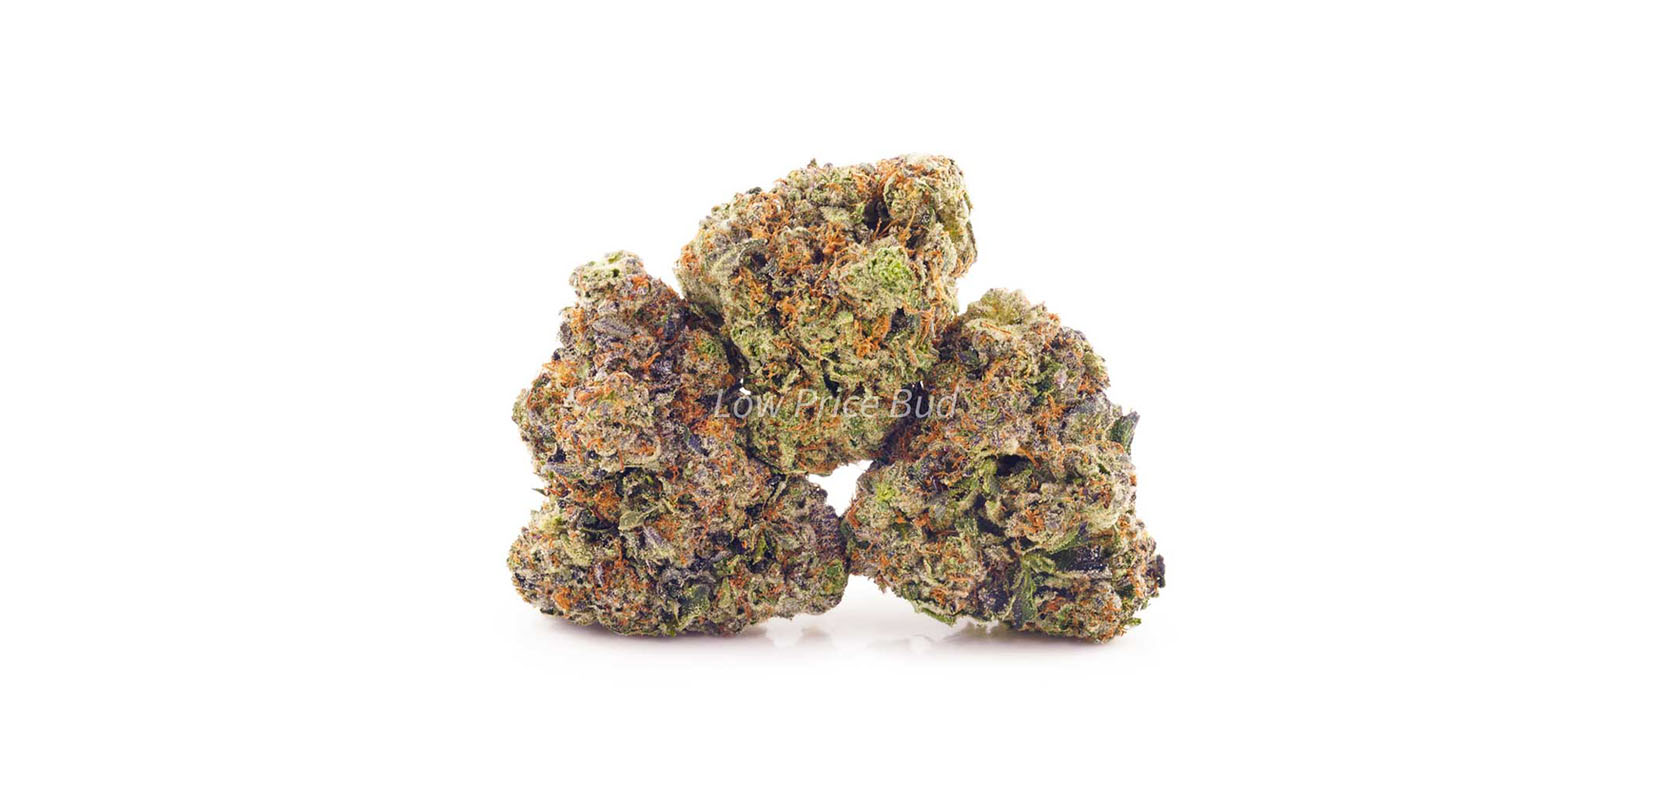 Buy Death Bubba strain value buds from Low Price Bud dispensary for cheapweed and weed online canada.